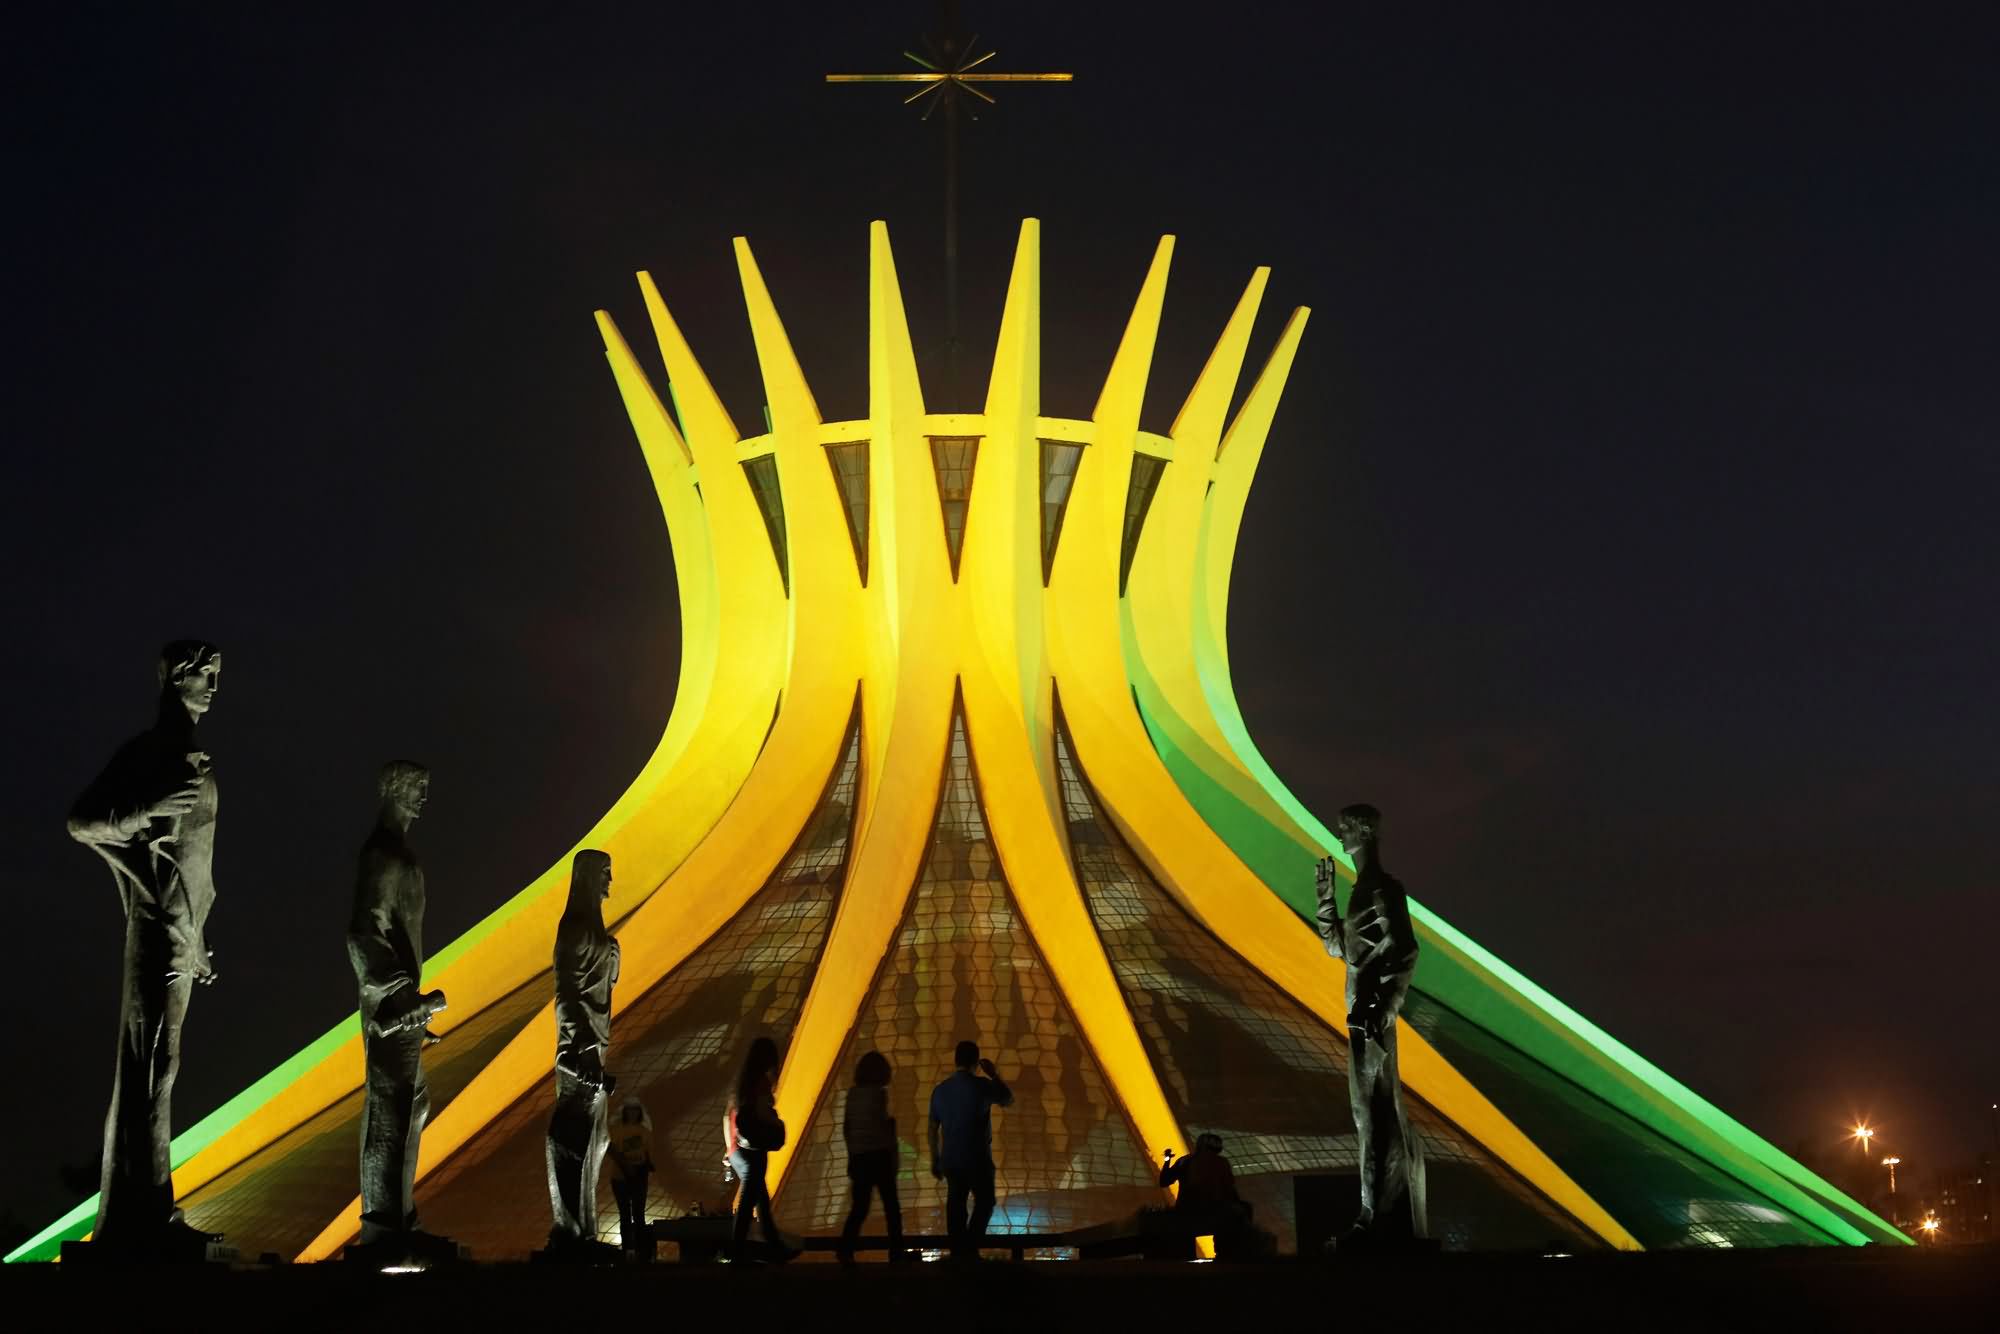 Cathedral of Brasília Lit Up During Night